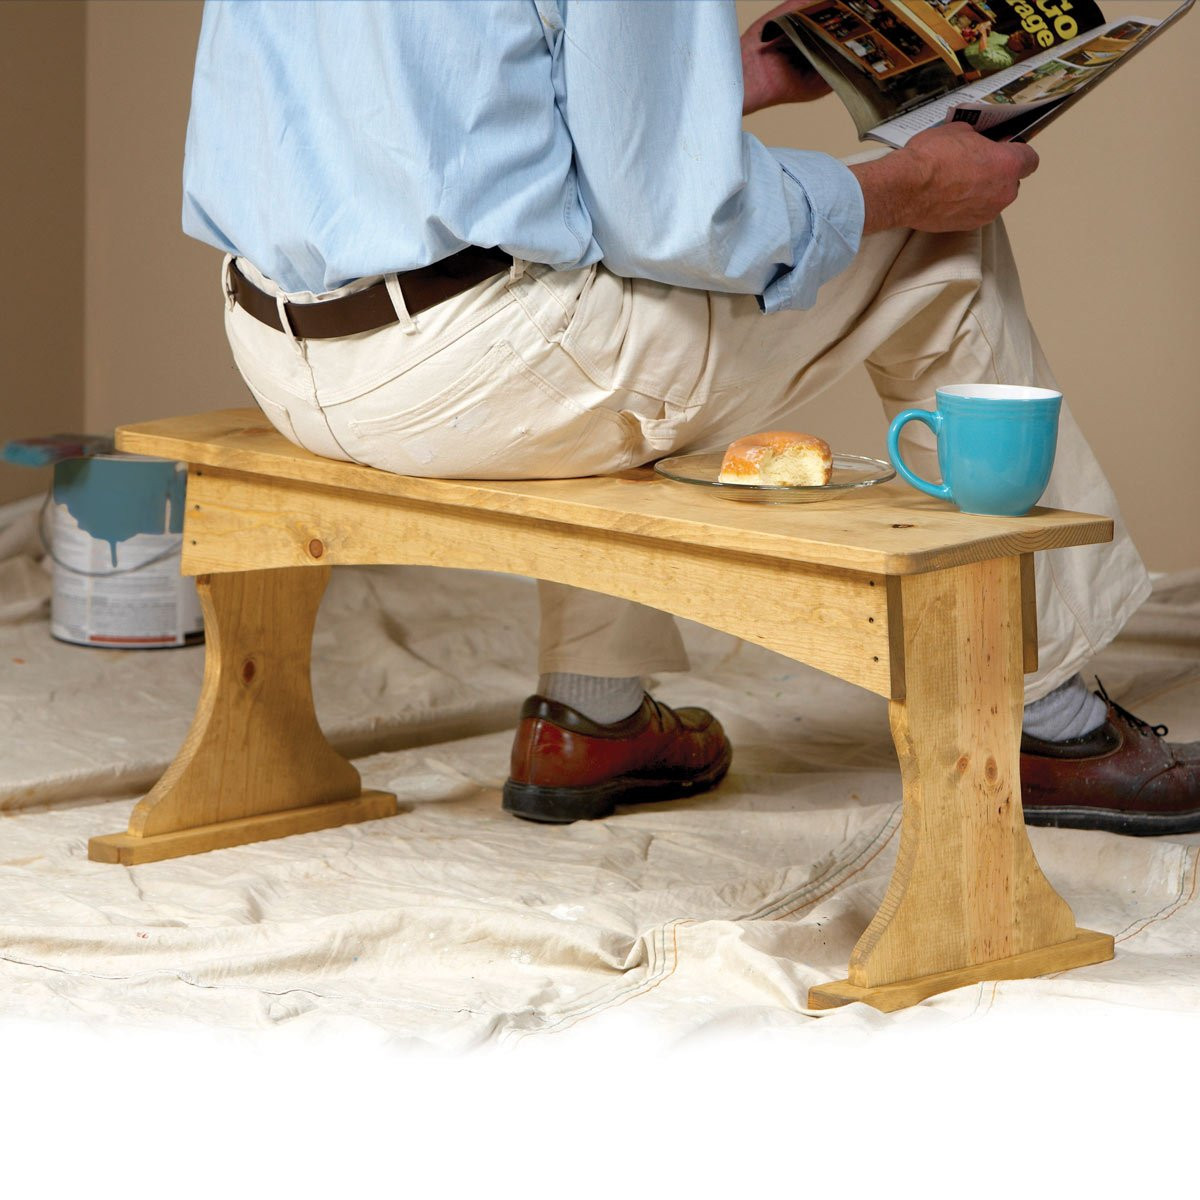 DIY Wood Working
 The Top 10 DIY Wood Projects — The Family Handyman